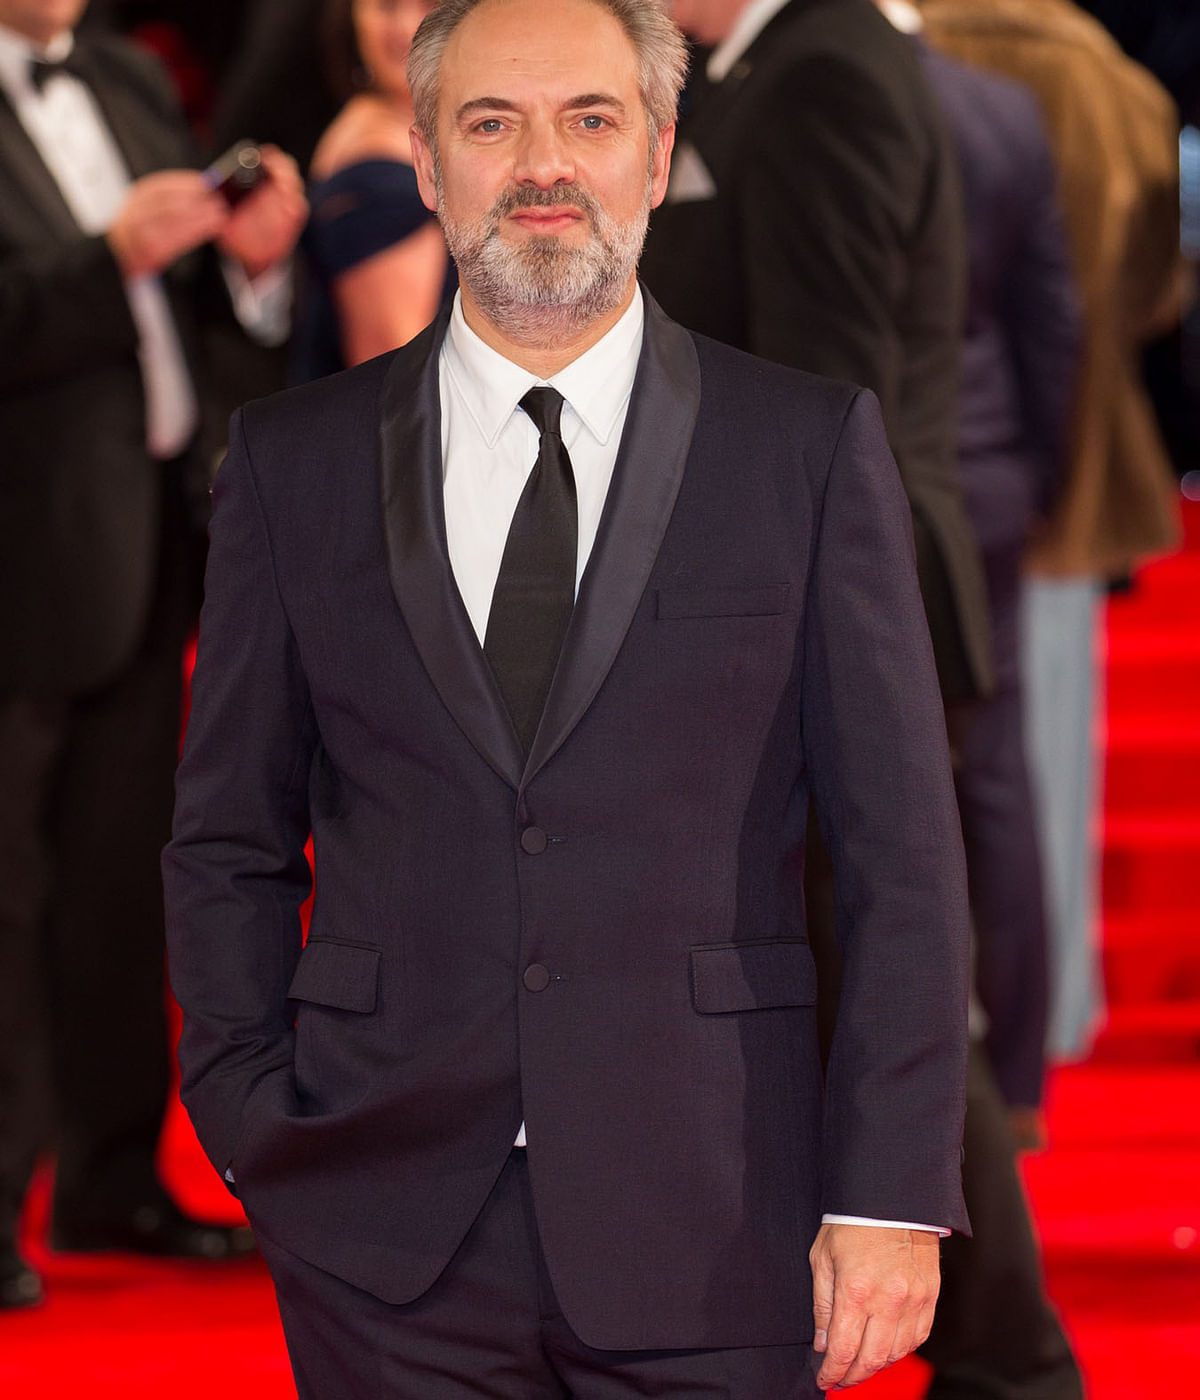 Sam Mendes talks about Skyfall (2012), his latest flick Spectre, and the trick behind making bolder Bond films. 